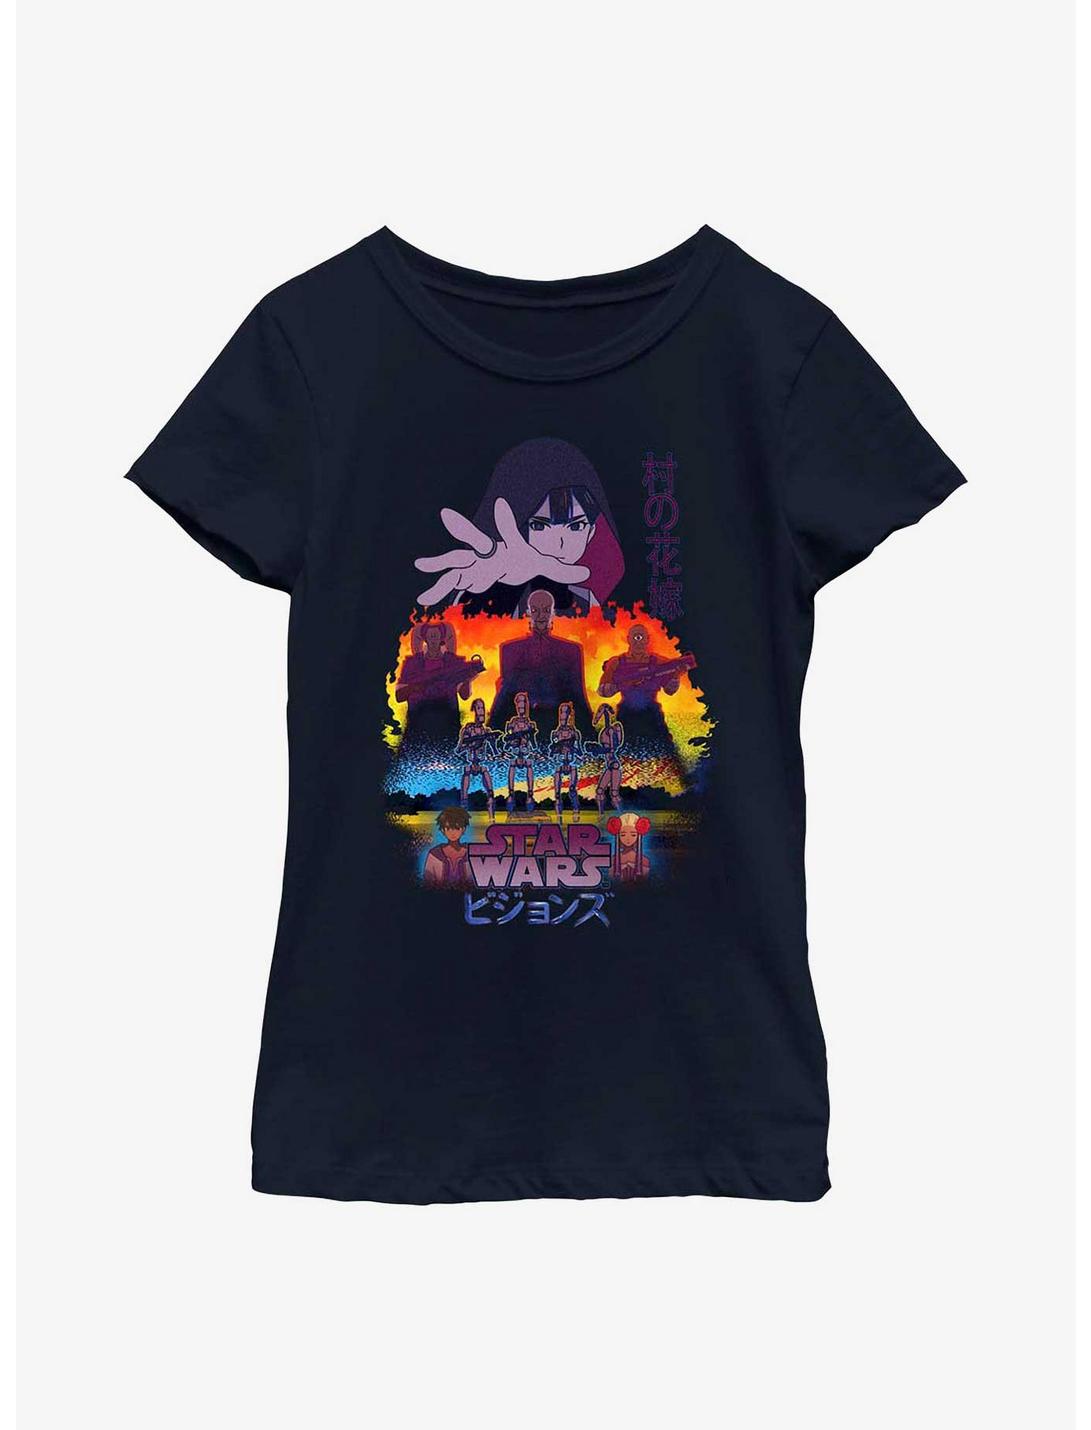 Star Wars: Visions It Takes A Village Youth Girls T-Shirt, NAVY, hi-res